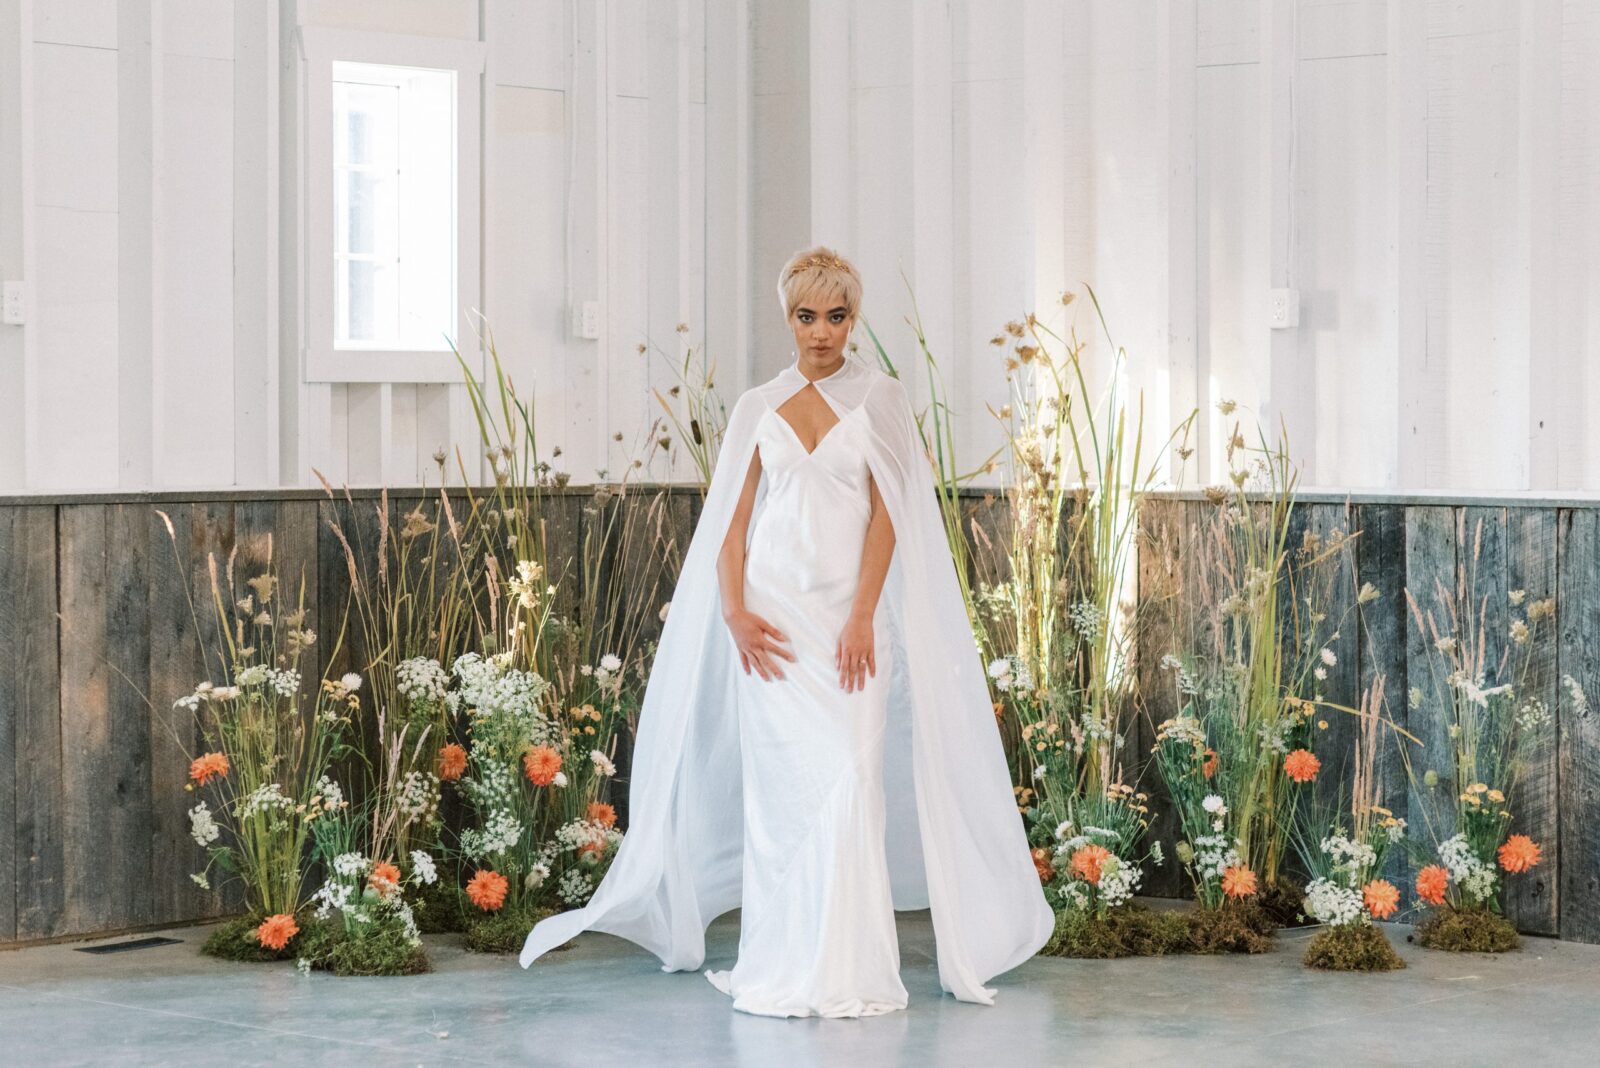 Indoor Wild Marsh Ceremony & Regal Bridal Beauty in this Show-Stopping Editorial featured on Brontë Bride